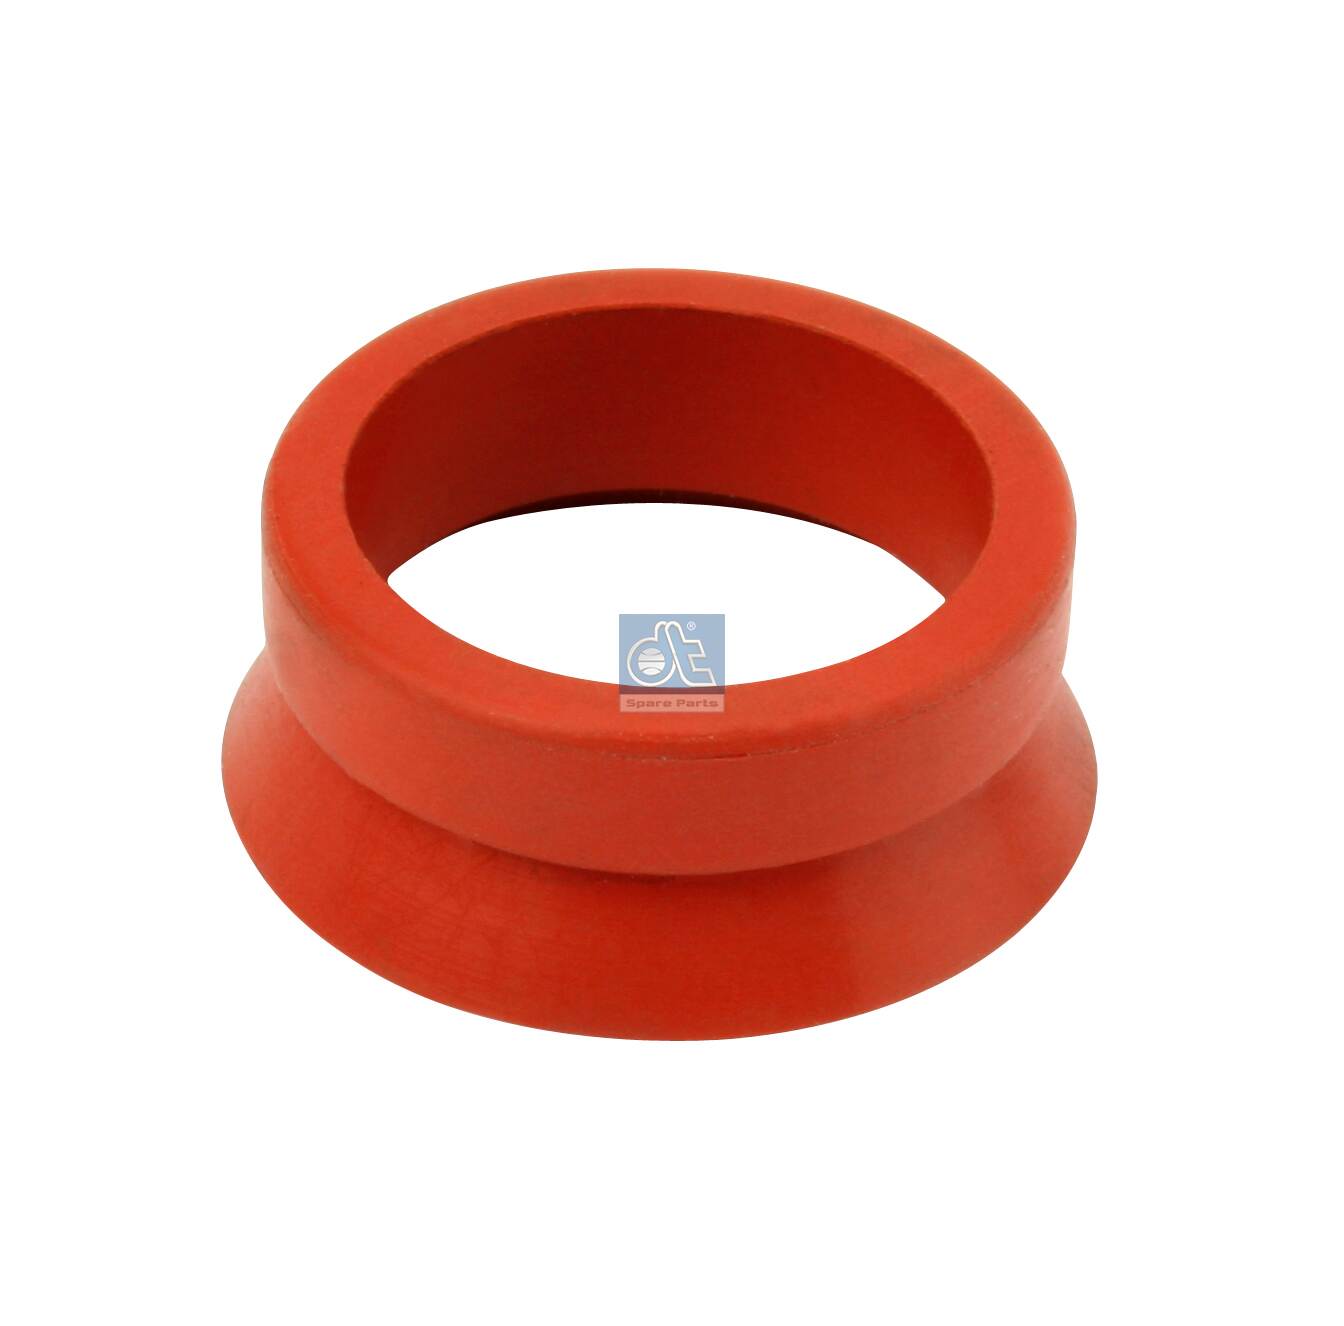 2.12200, Seal Ring, DT Spare Parts, Volvo Truck & Bus Marine & Industry TD60* TD61* TD63* TD70* TD71* TD73* TD100* TD101* TD102* TD120* TD121* TD122* TD123* D6A D7A D7B D7C D10A, 469455, 948965, 032.141, 07847, 11867, 2809305, 36294DPH, 703108200, 71574, VOLVO469455, 02.03.99.218810, 032141, 1242476, 28093.05, 70-31082-00, EPL455, EPL-455, 020399218810, 4047755366766, 4047755295592